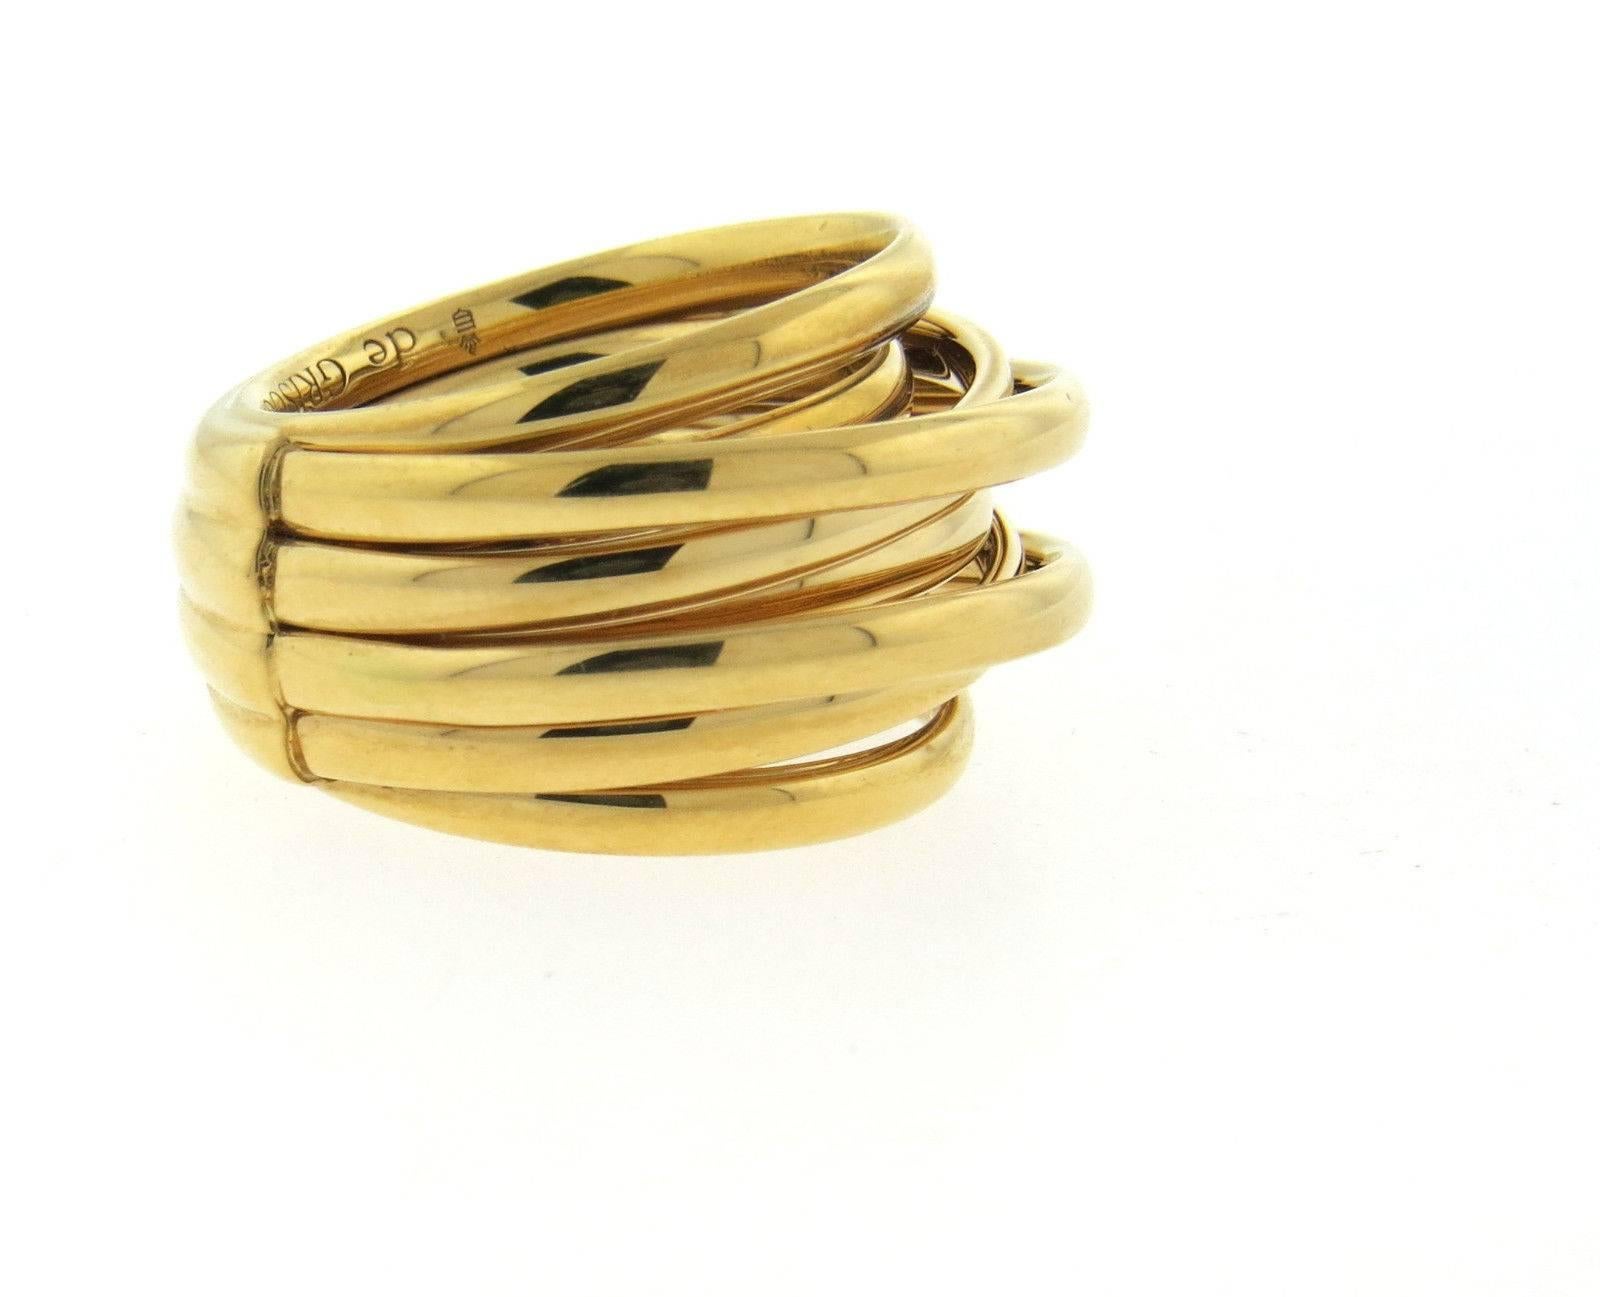 An 18k yellow gold ring crafted by De Grisogono for the Matassa collection.  The ring is a size 5 and 17mm wide.  Marked: De Grisogono , Au750.  The weight of the ring is 28 grams.